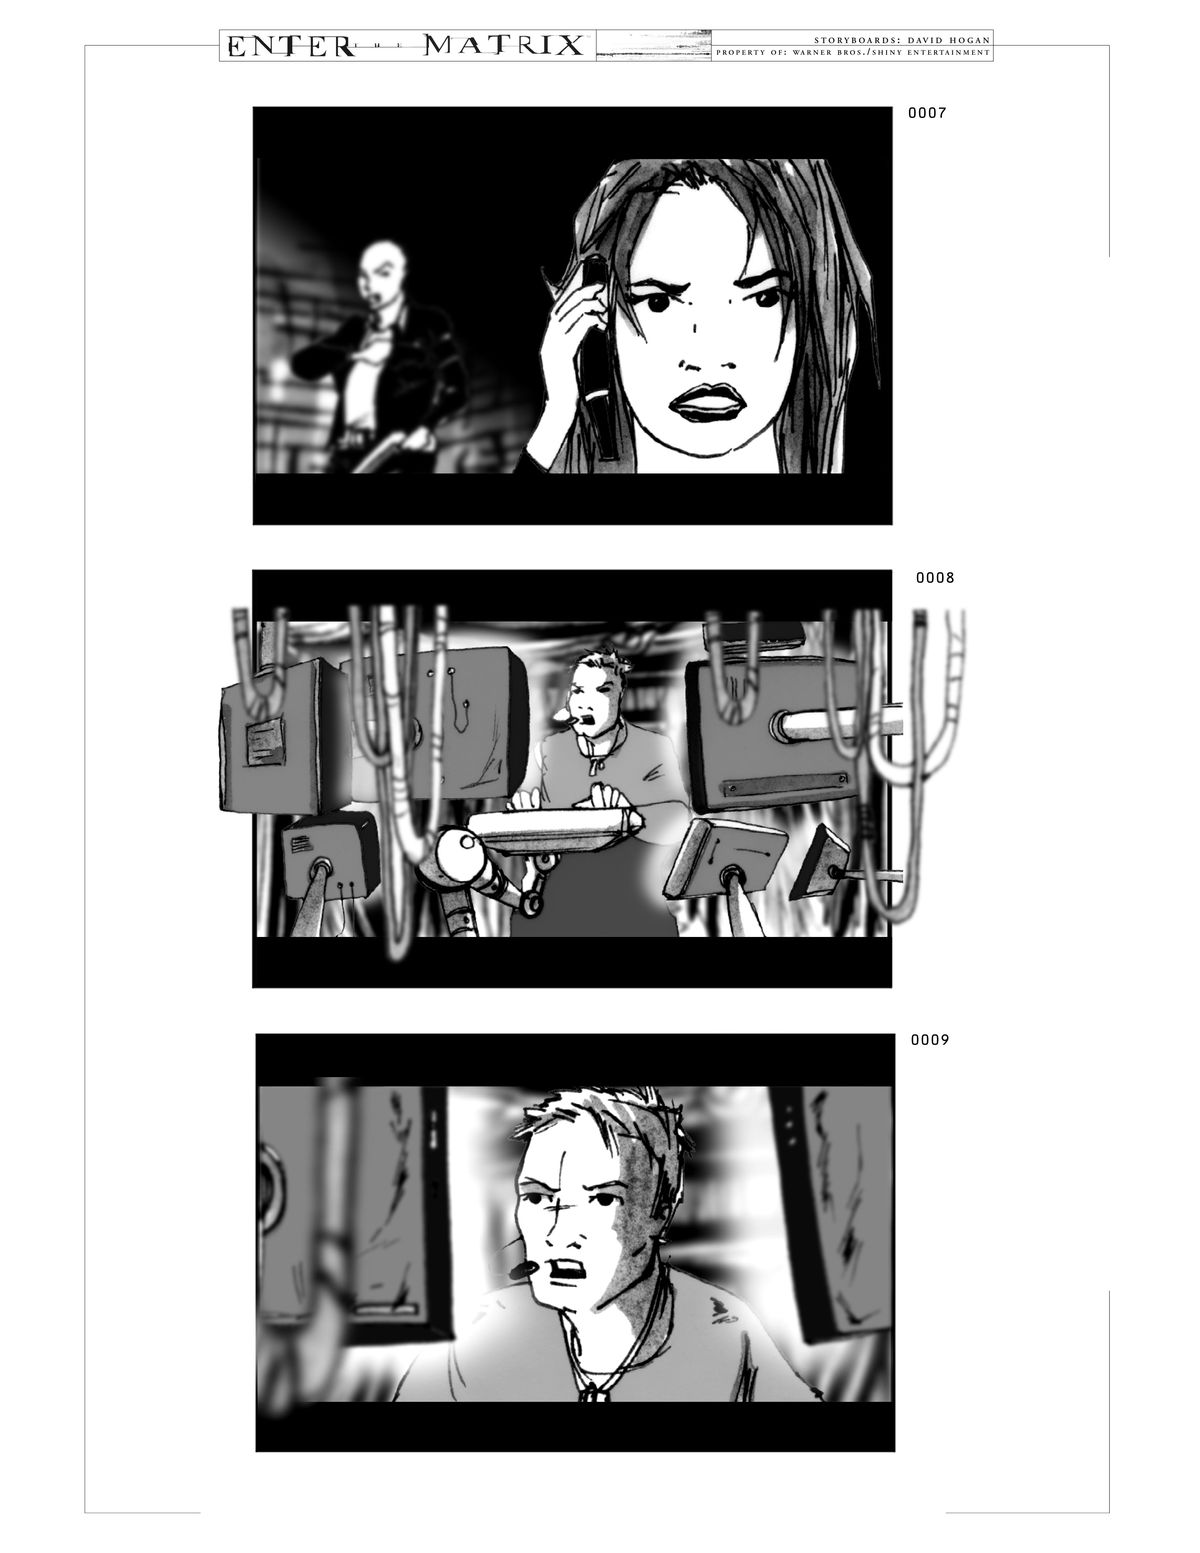 In a trio of storyboard drawings, characters from Enter the Matrix communicate about an escape plan over the phone